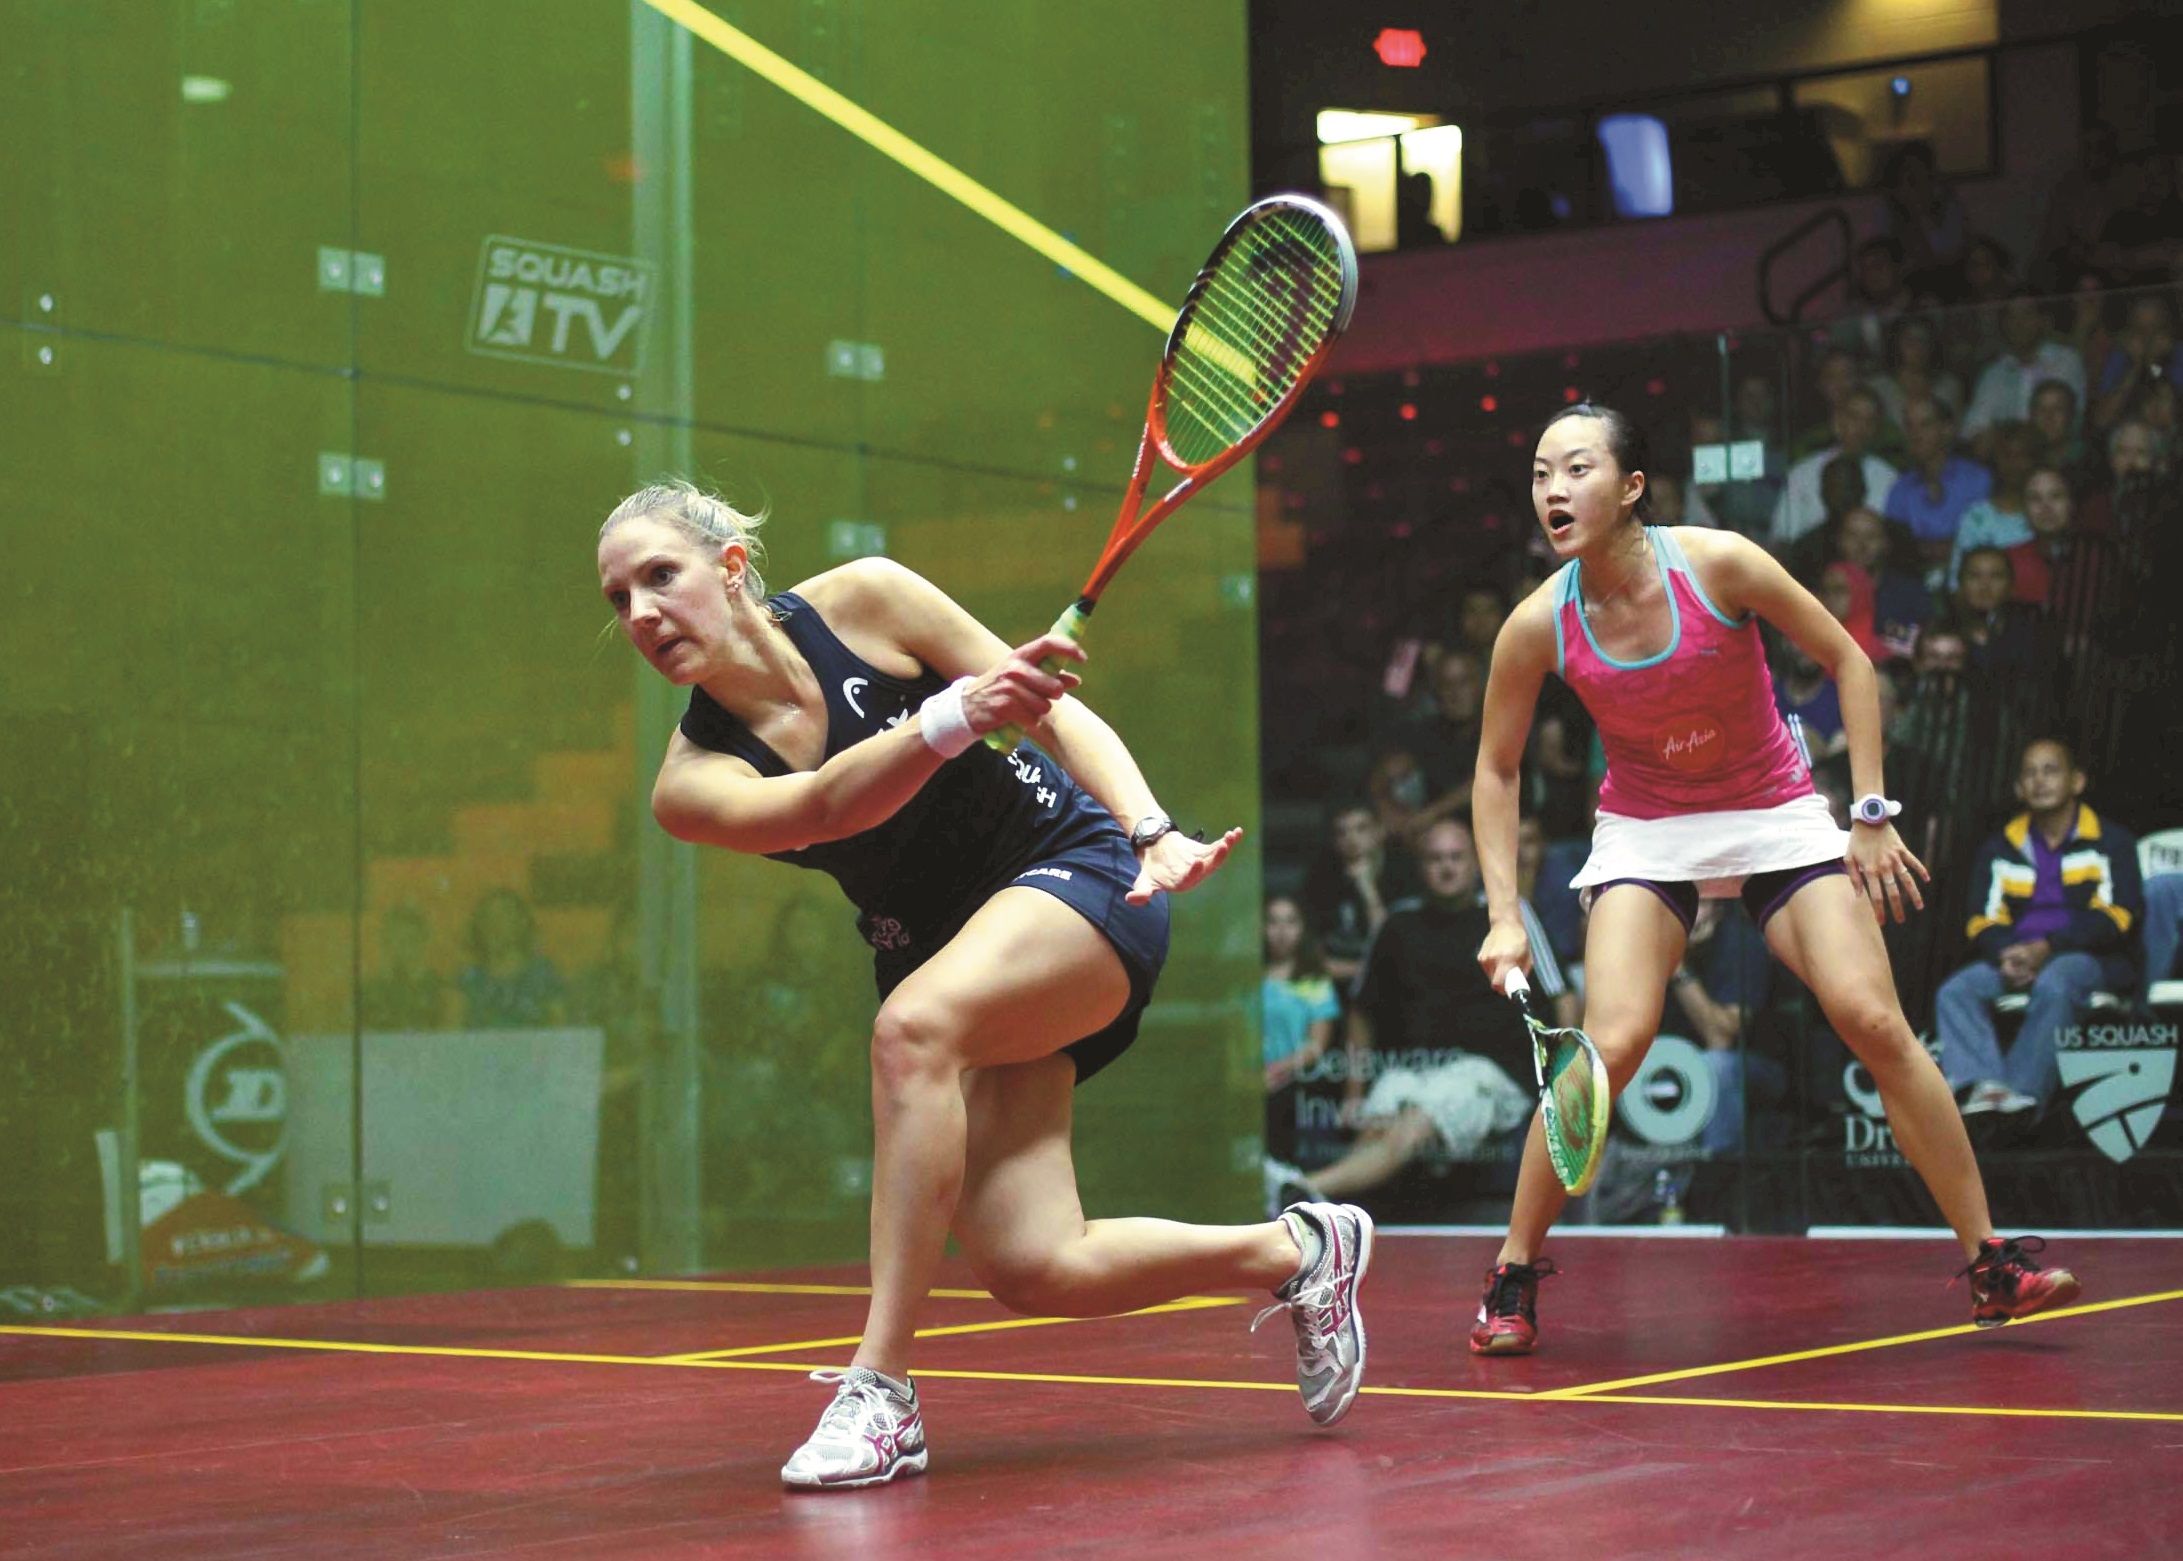 US SQUASH. Equality Key as Squash Plans for Future after Olympic Rejection